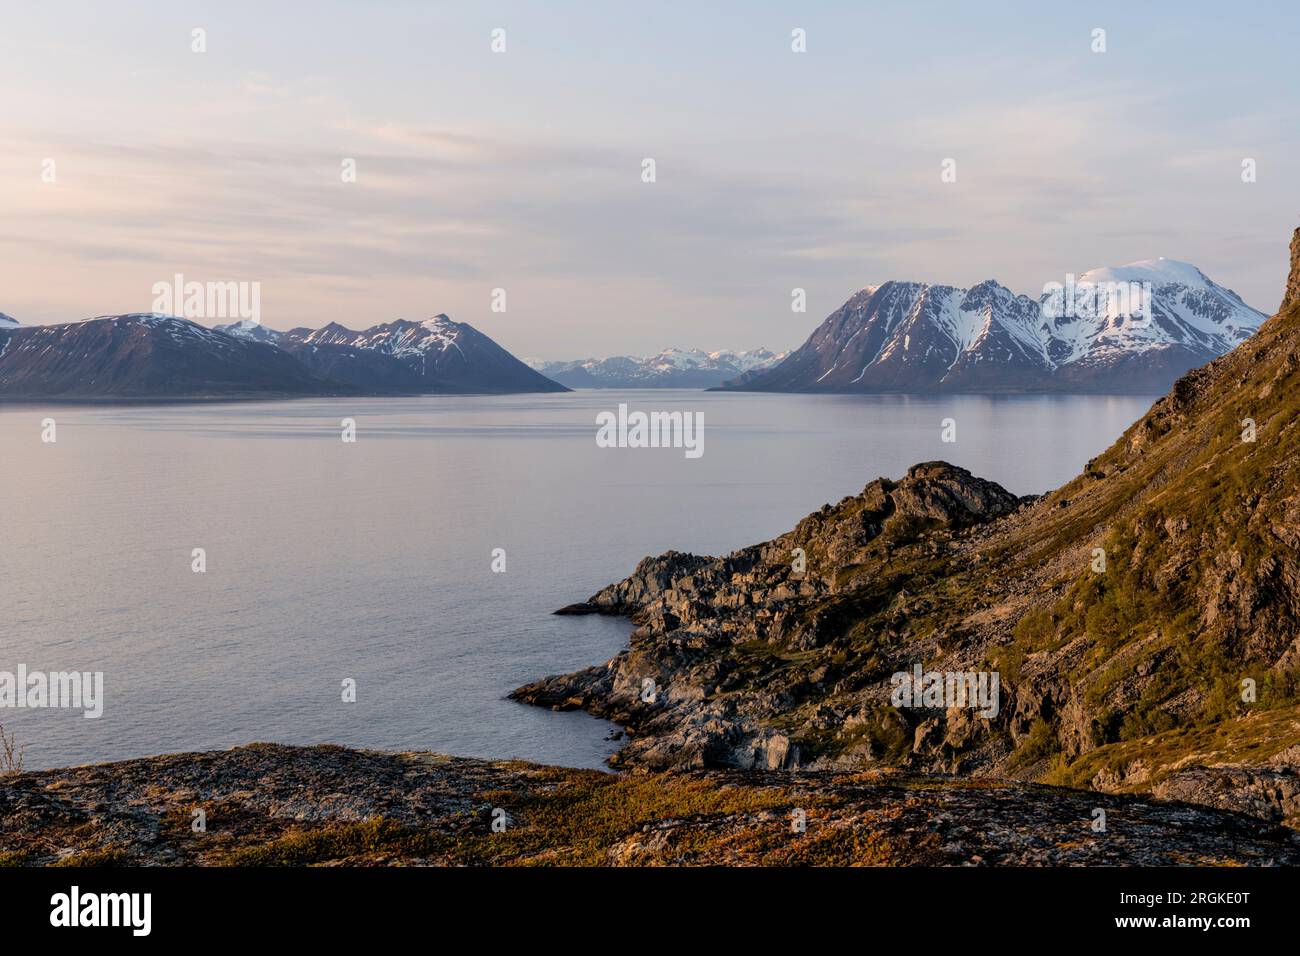 Hike in the midnight sun to Lyngstuva, the outermost point of the Lyngen Peninsula. View of the sea and islands. Lyngen Alps, Northern Norway, Europe Stock Photo